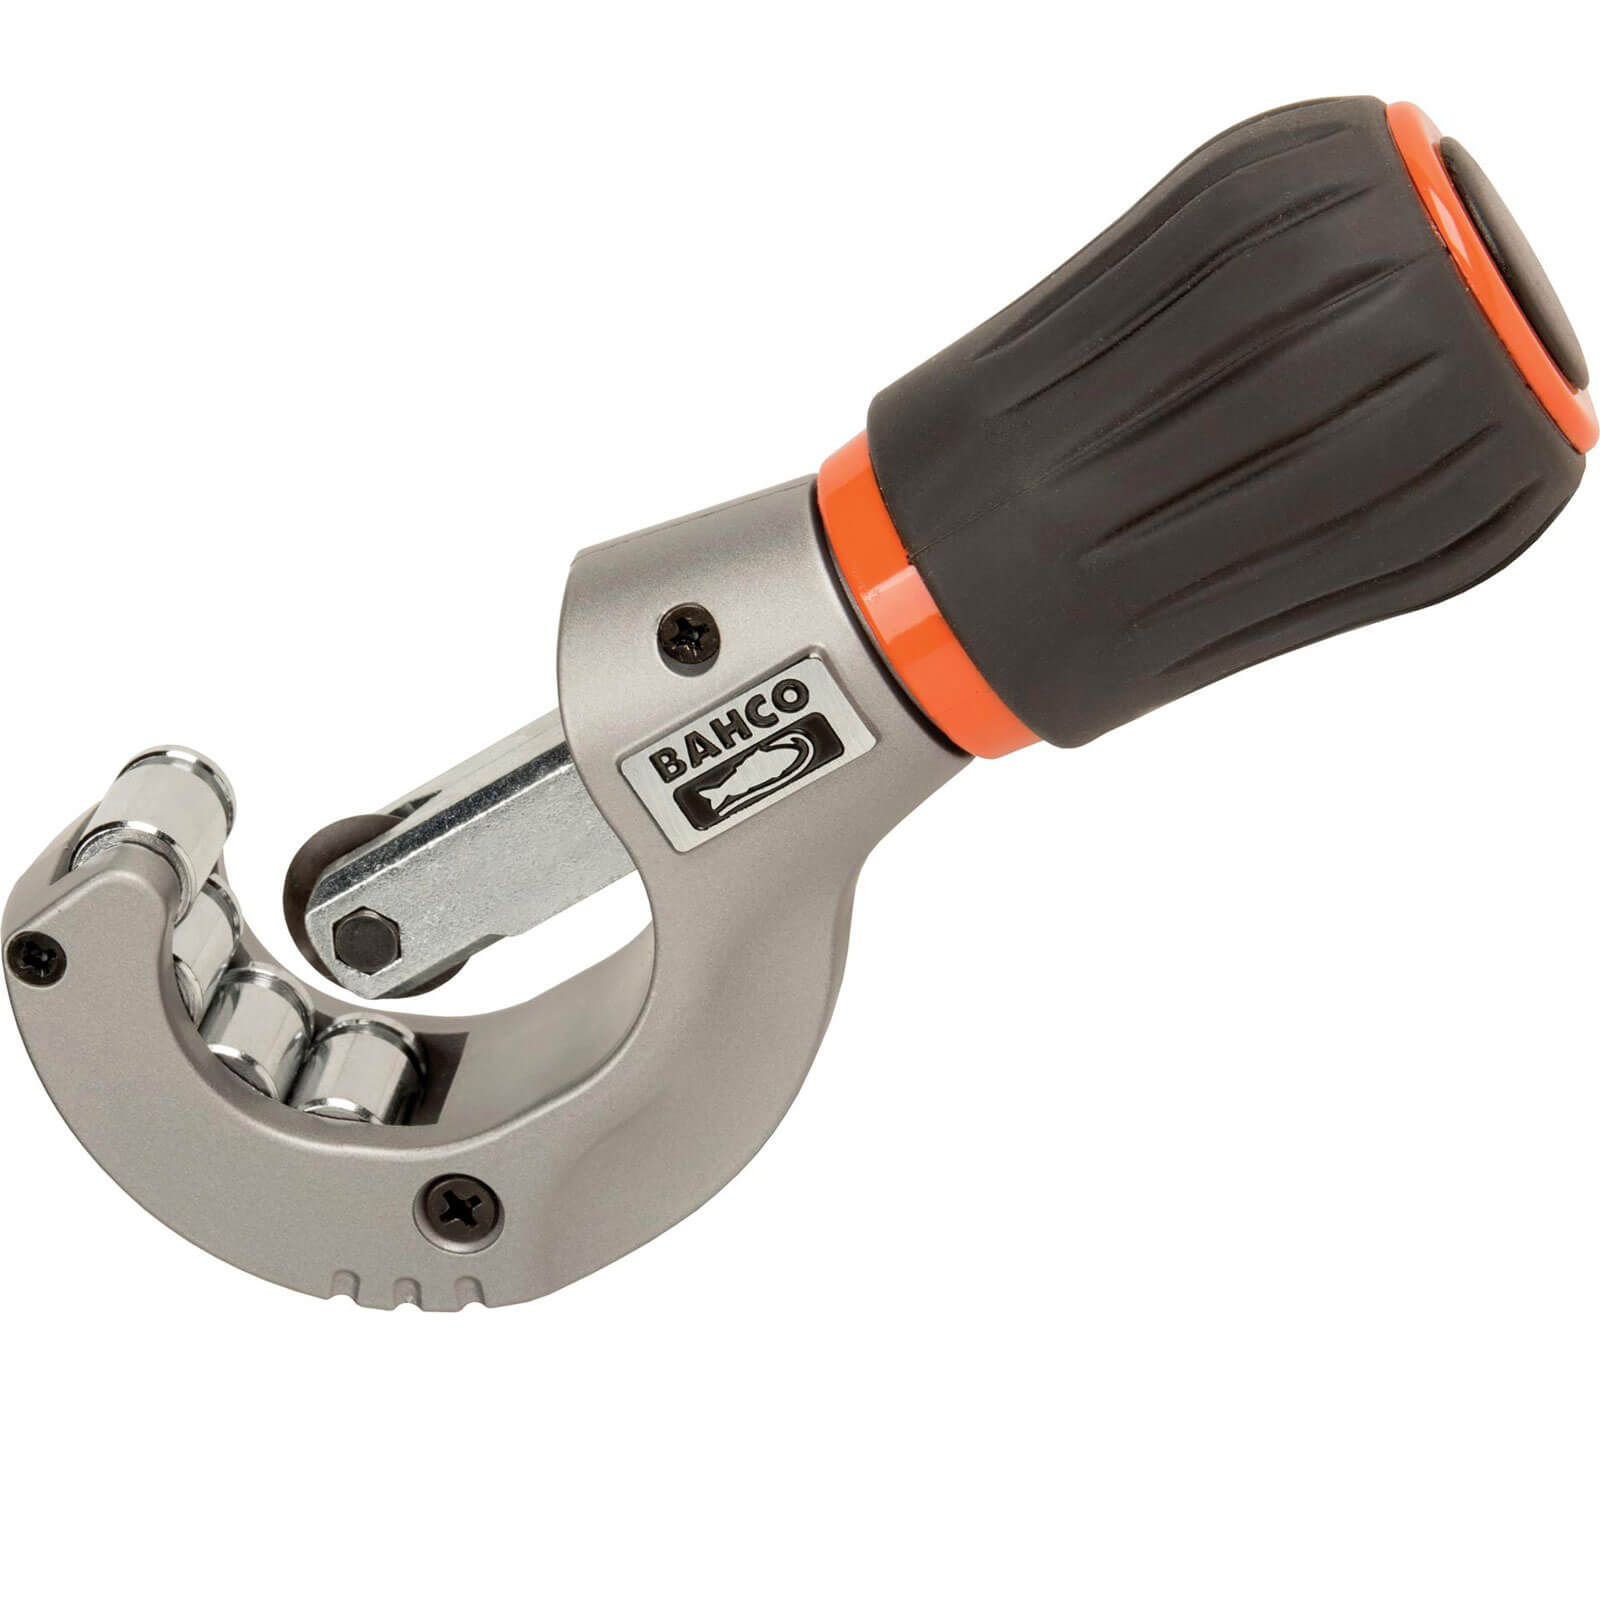 Image of Bahco 402-35 Pipe Cutter 3mm - 35mm